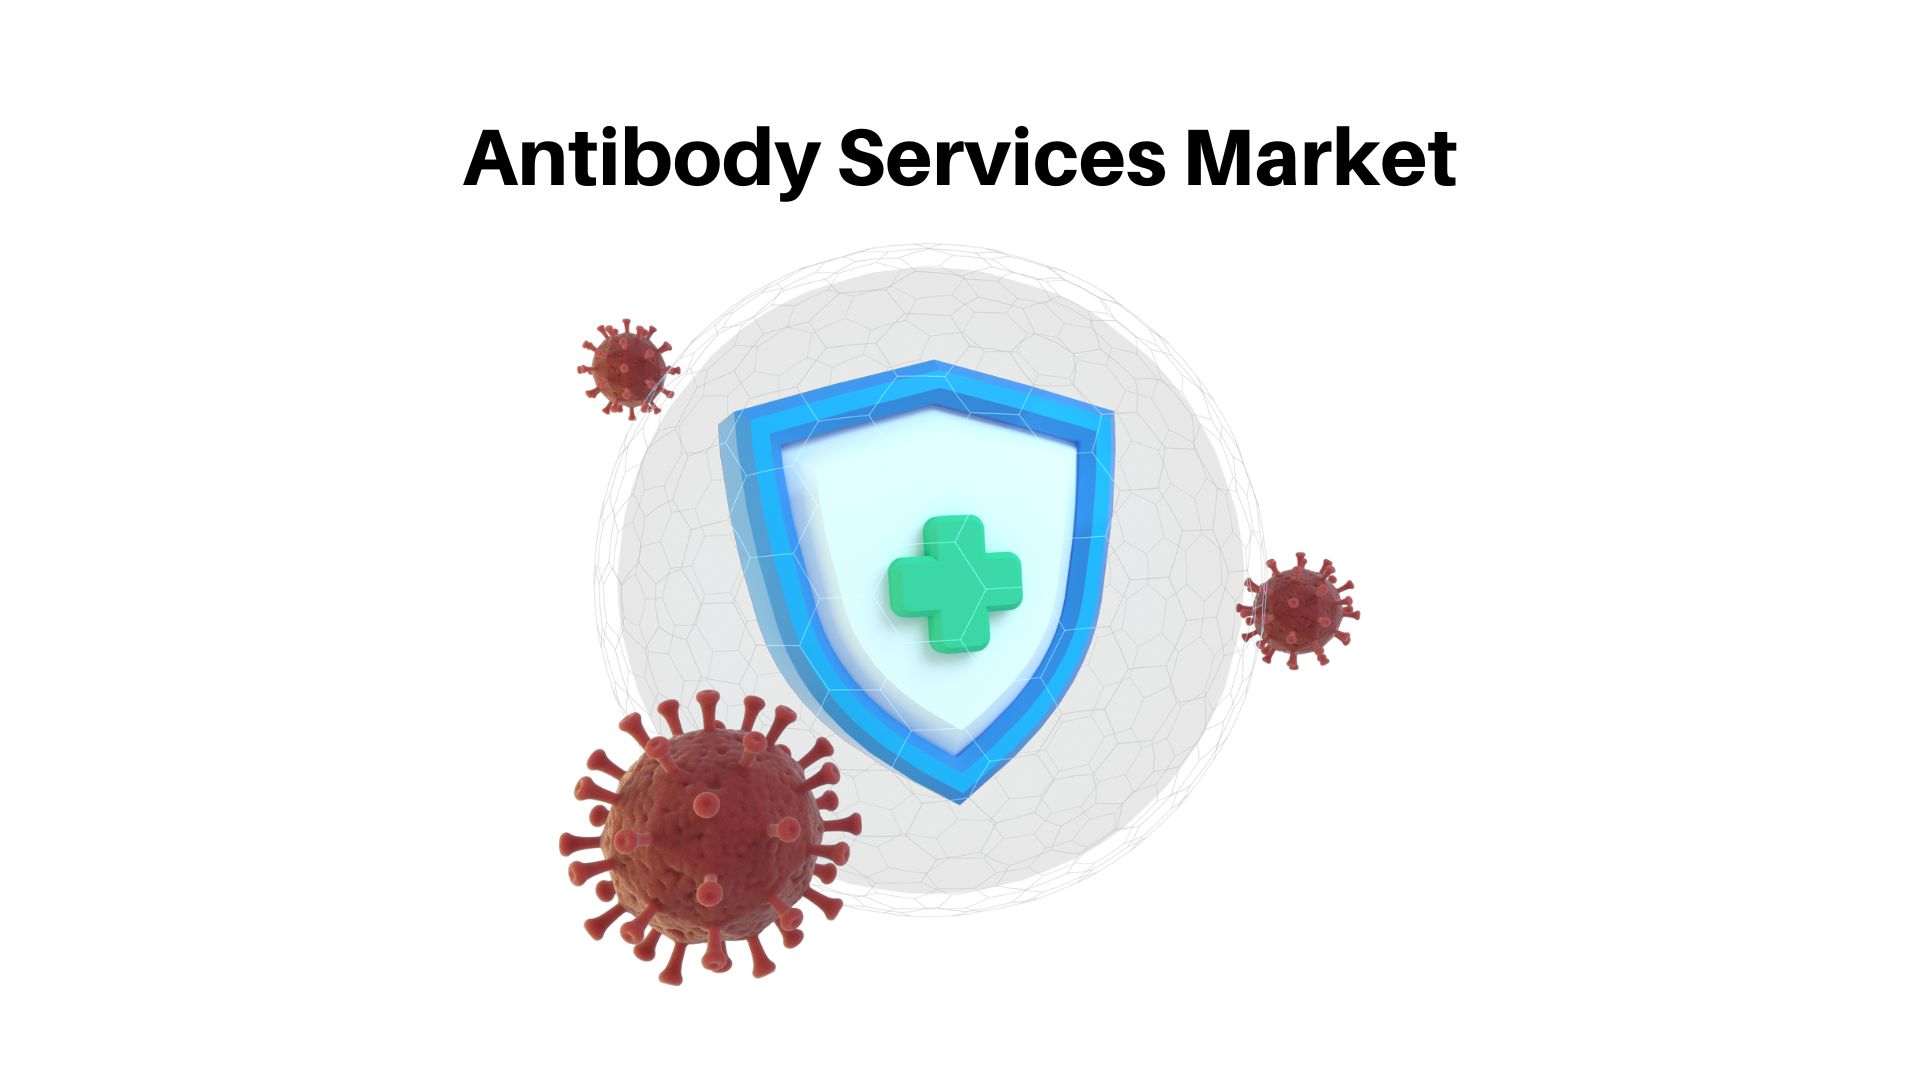 Global Antibody Services Market Size was valued at USD 11.56 Bn in 2022 and is estimated to reach USD 45.17 Bn by 2032 | by Market.us